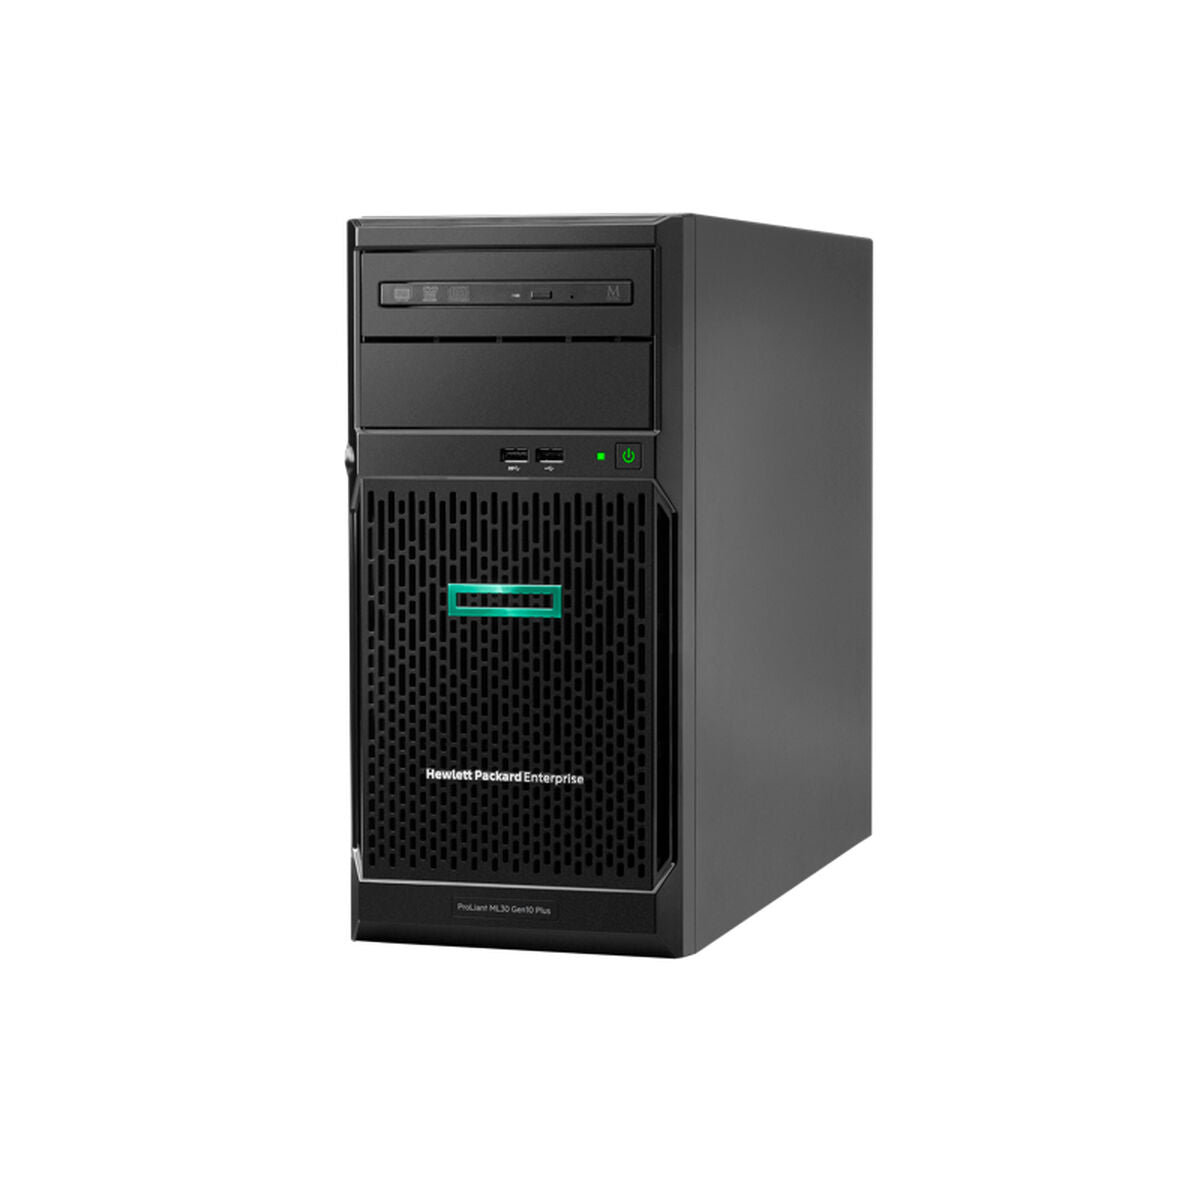 Server HPE P66396-421, HPE, Computing, server-hpe-p66396-421, Brand_HPE, category-reference-2609, category-reference-2791, category-reference-2799, category-reference-t-19685, category-reference-t-19905, computers / components, Condition_NEW, office, Price_+ 1000, Teleworking, RiotNook